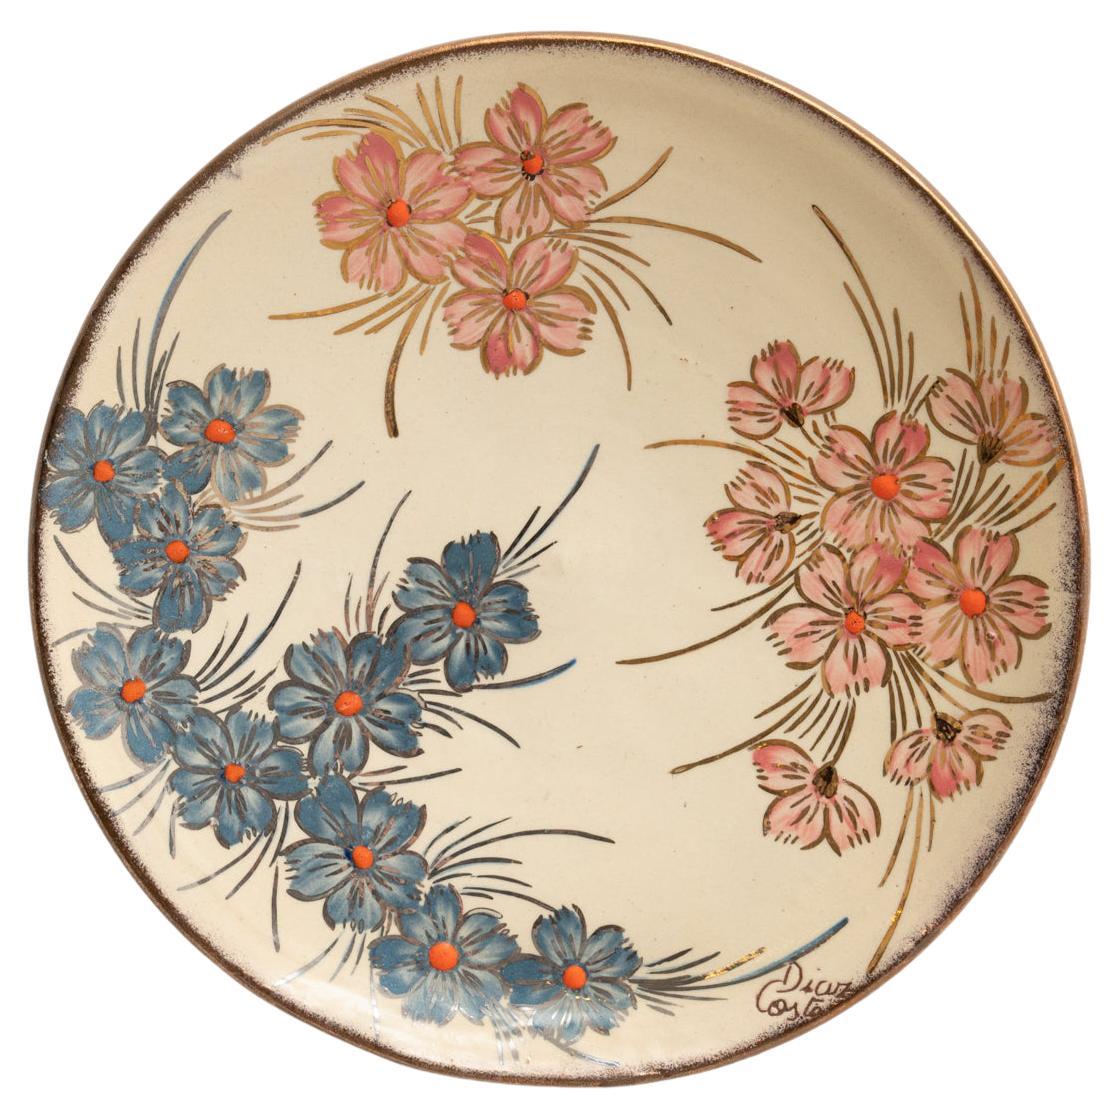 Ceramic Traditional Hand Painted Plate by Catalan Artist Diaz COSTA, circa 1960 For Sale